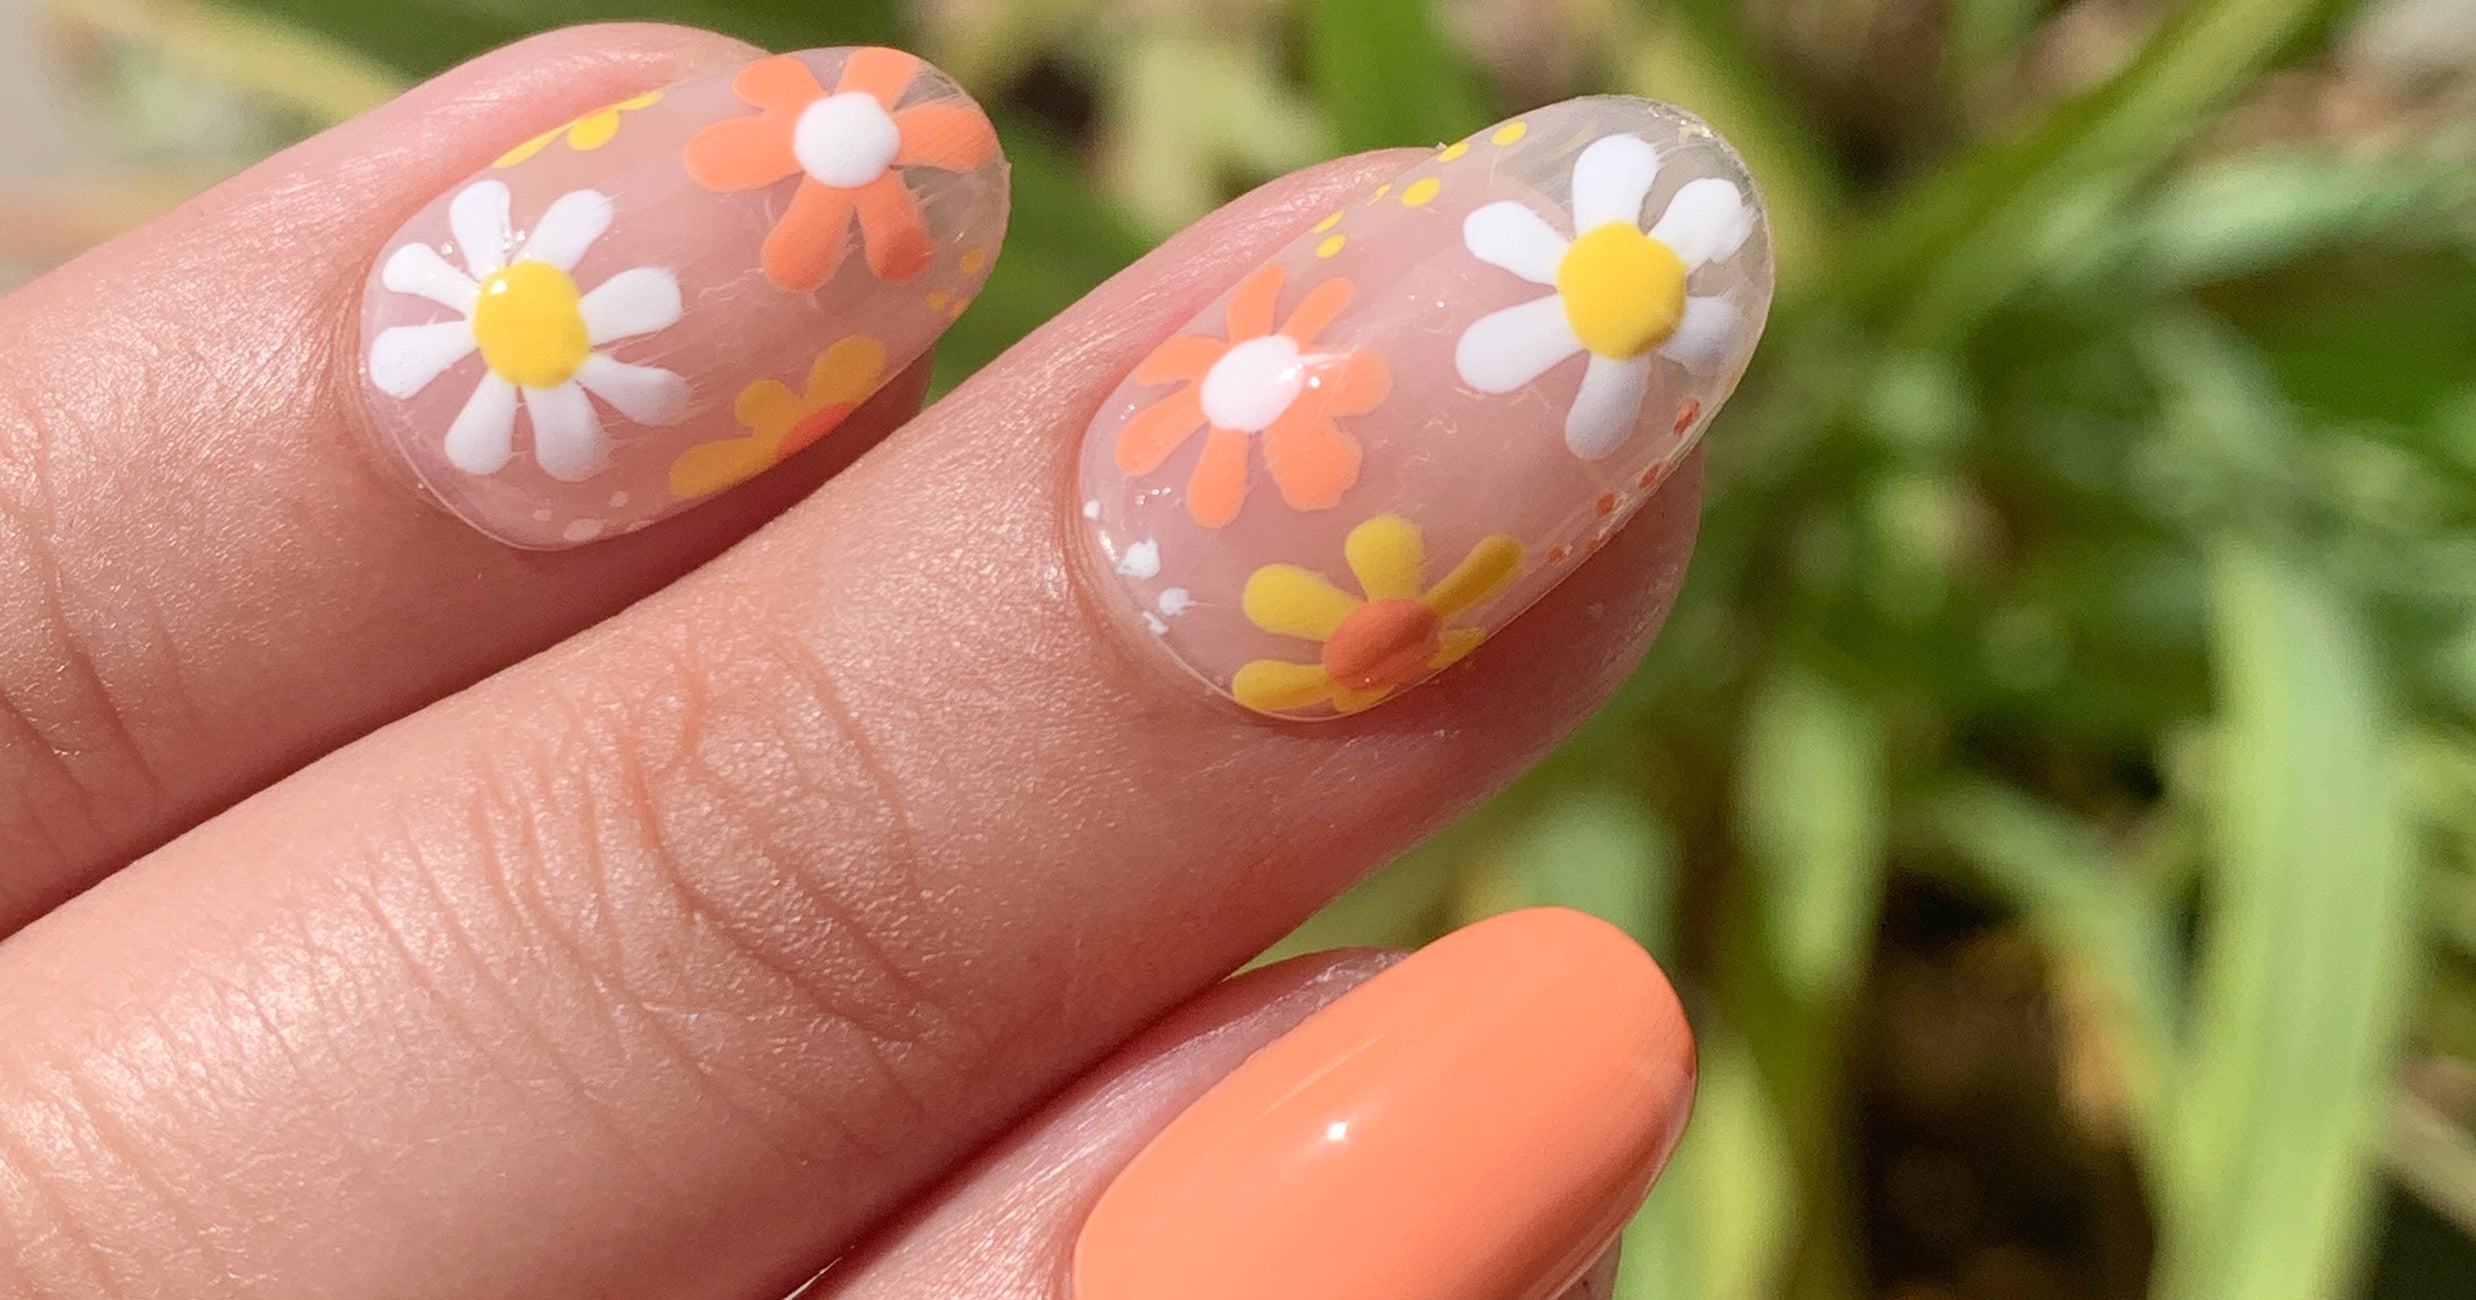 3. Simple Dotted Nail Art Ideas - wide 5